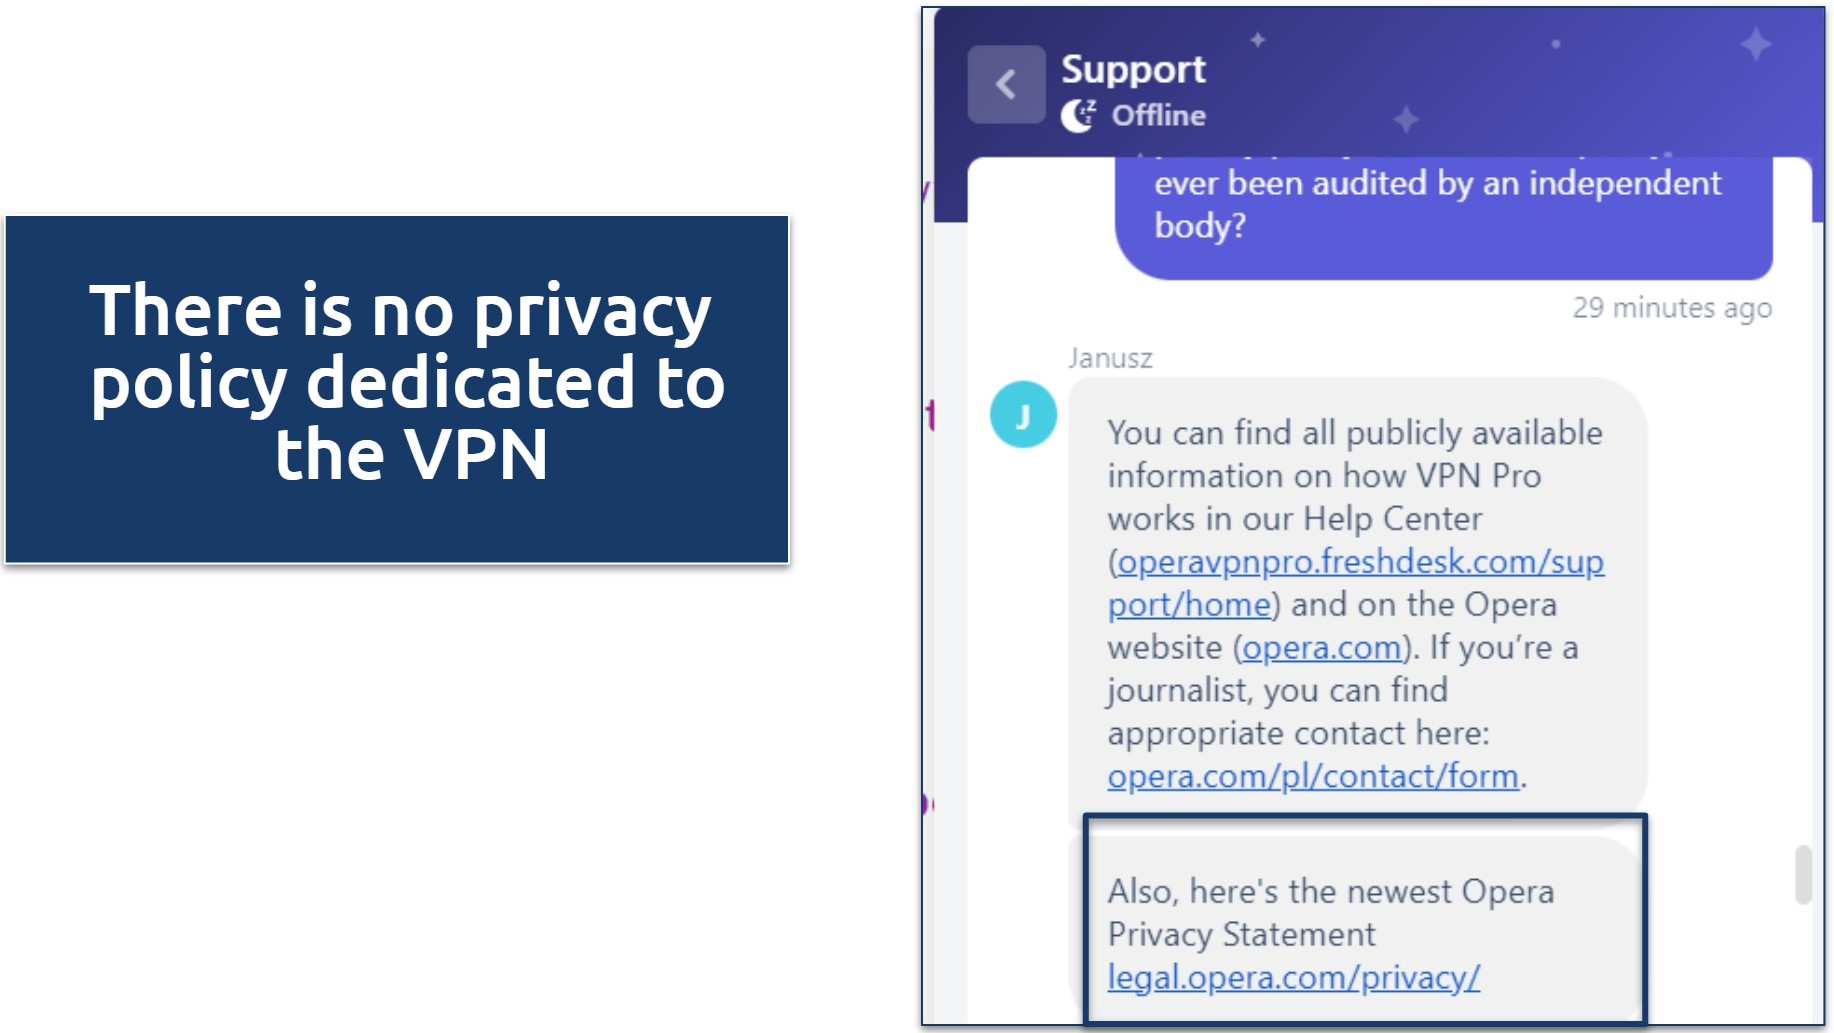 Screenshot of a chat response from Opera VPN Pro support